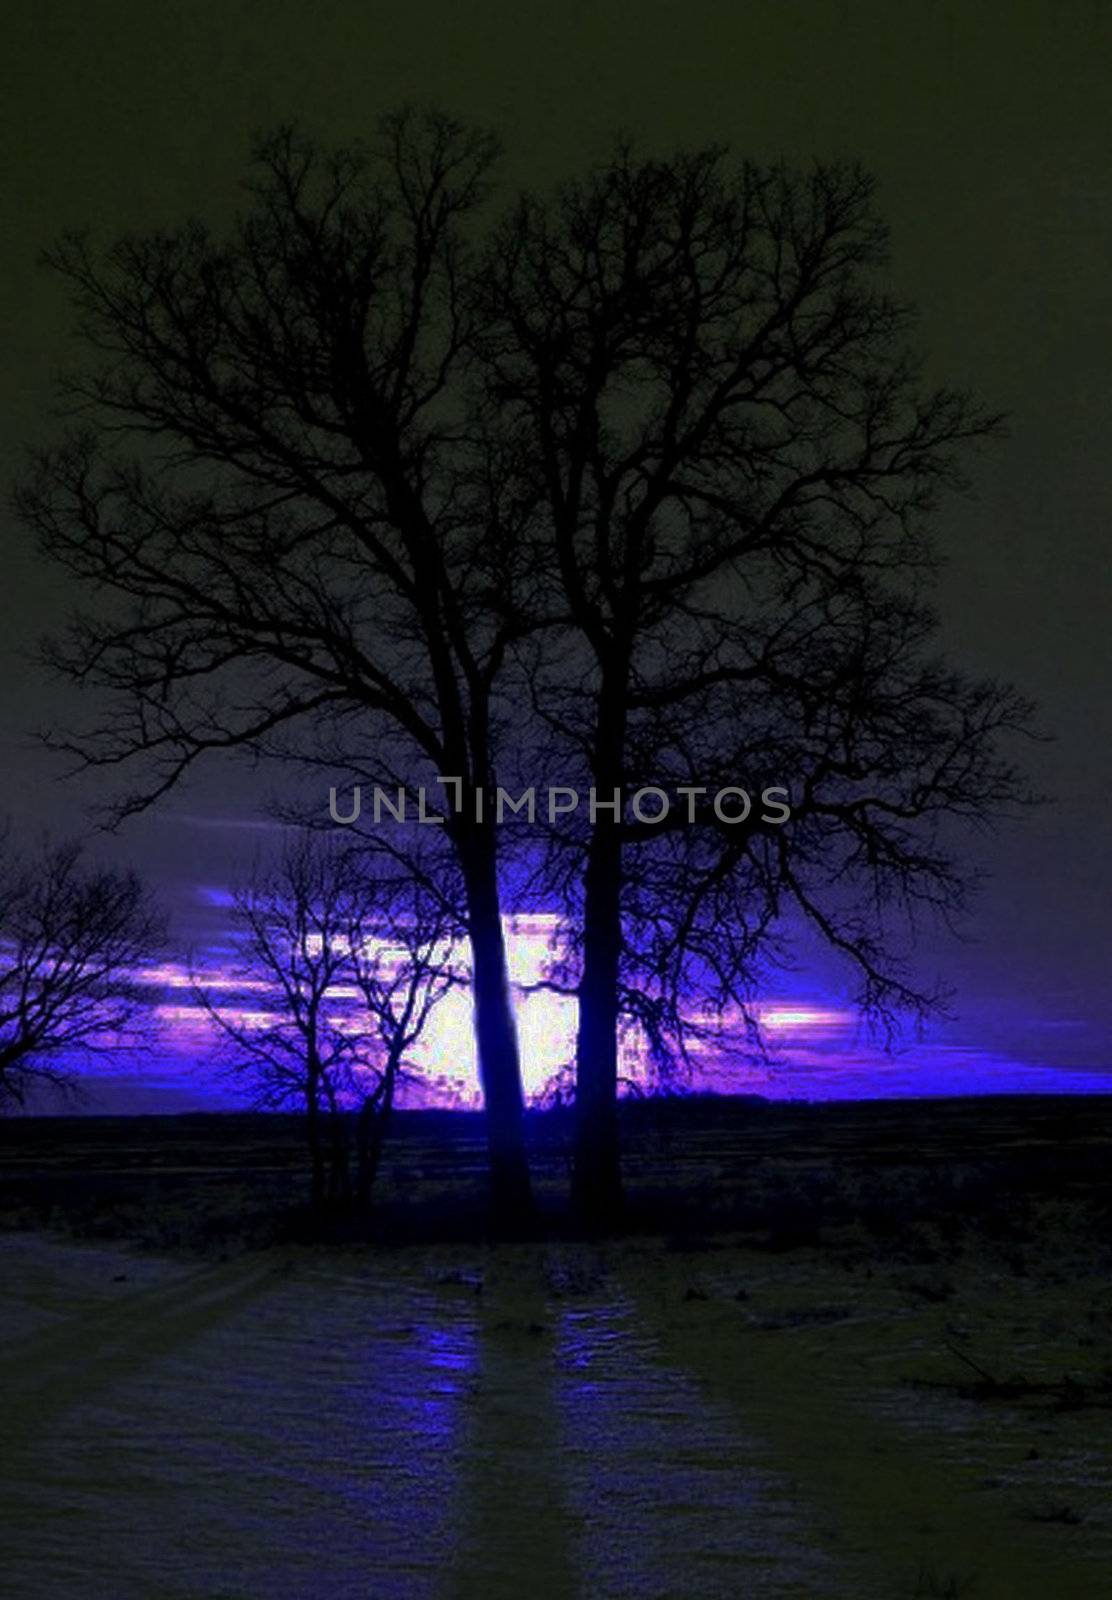 Two leafless trees in the middle of a snow cover field under a purple sunset.